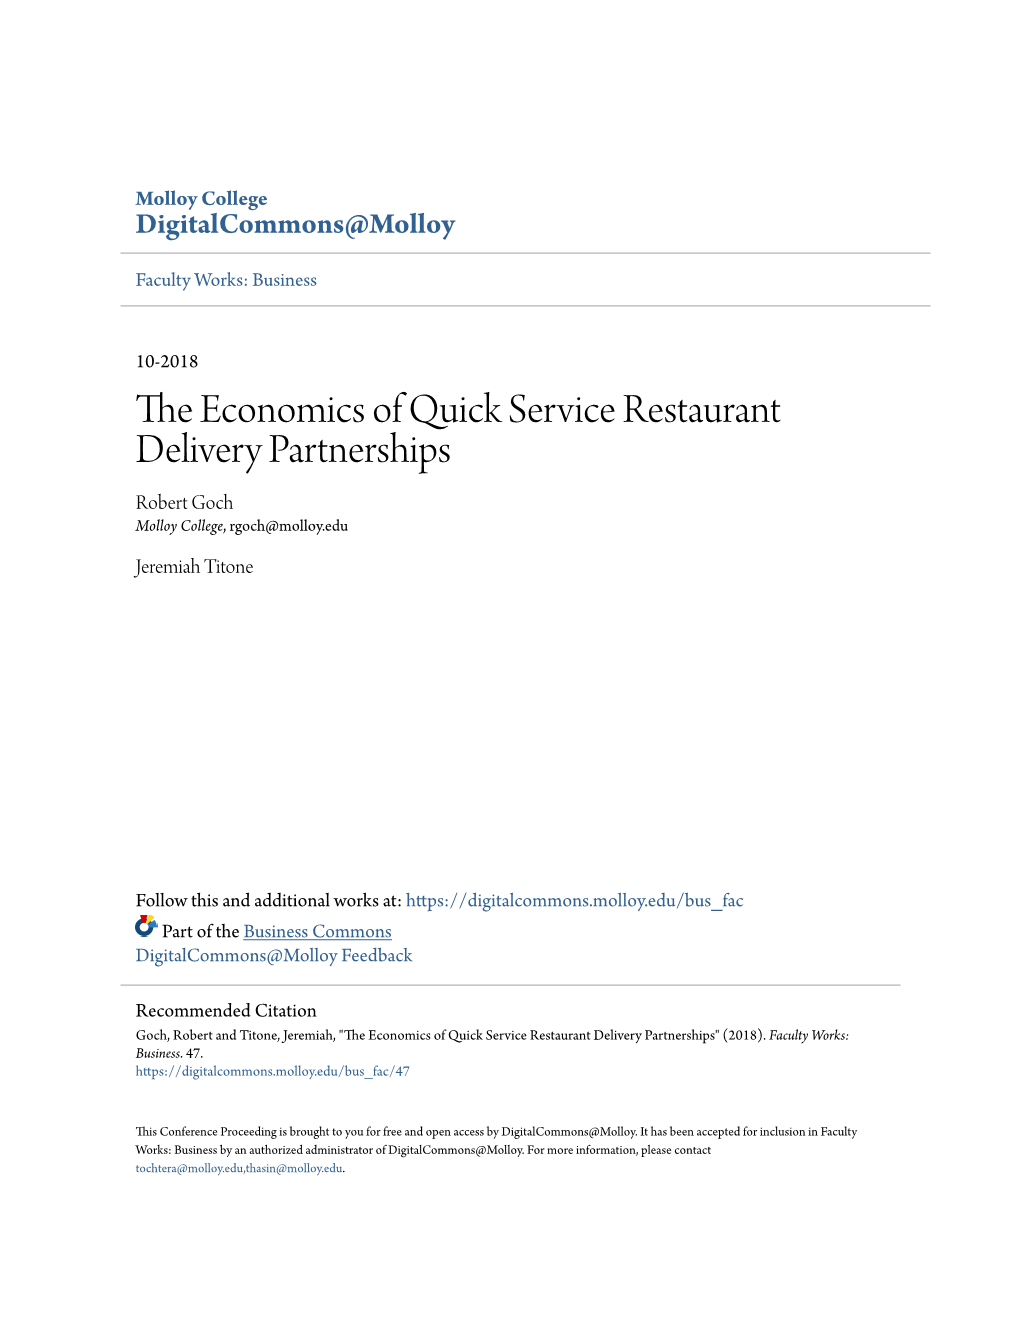 The Economics of Quick Service Restaurant Delivery Partnerships